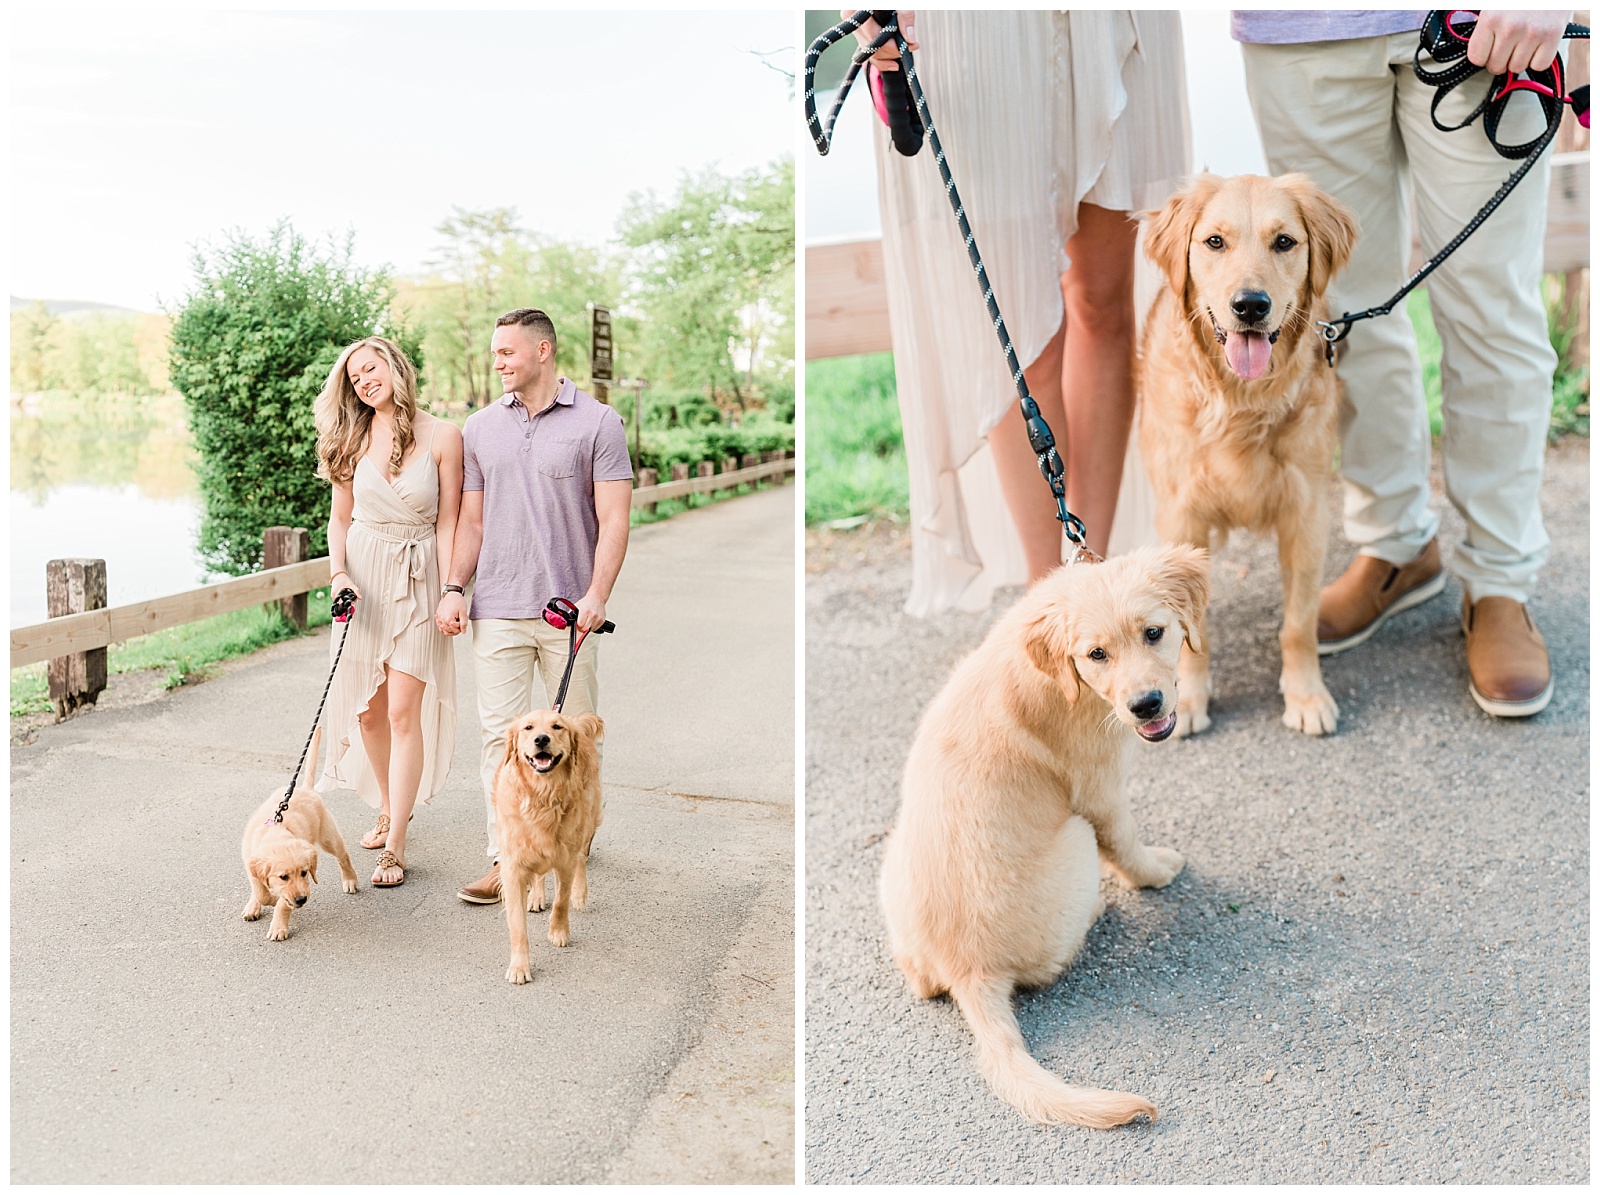 A man and woman walk their dogs, two golden retriever puppies.